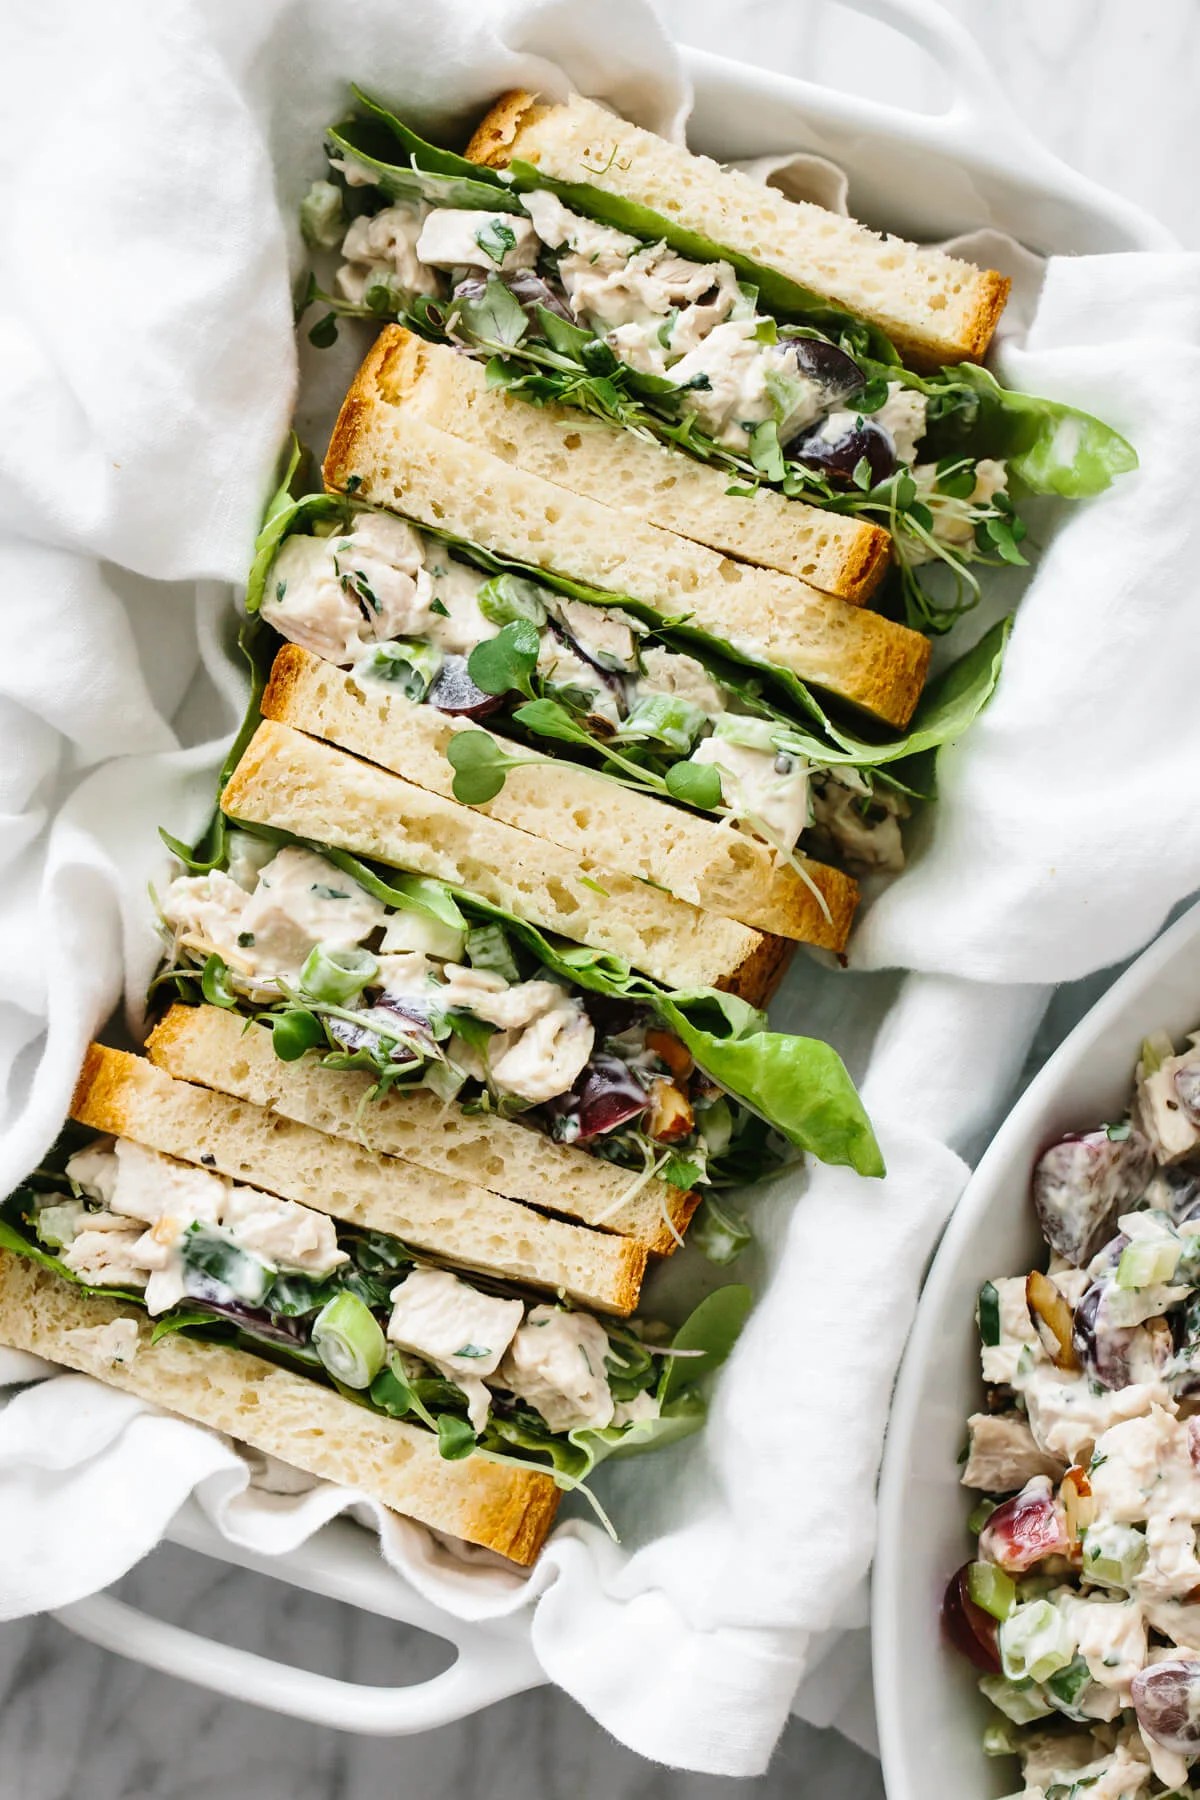 Chicken salad sandwiches sliced in half on a serving tray.